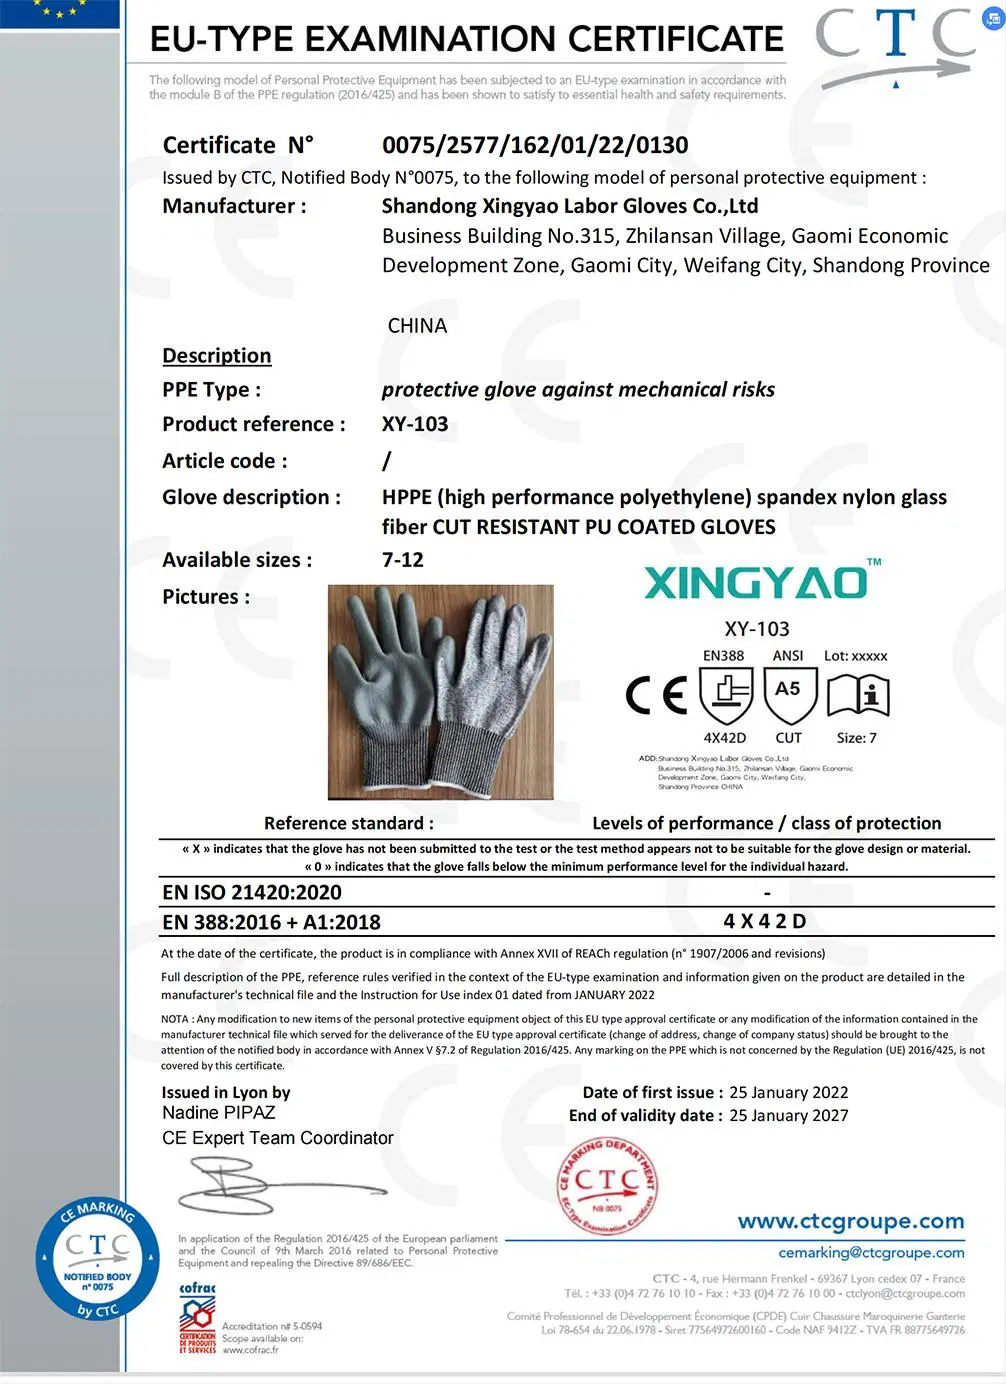 En388 ANSI5 Nylon & Hppe & Glass Fiber Liner PU (Polyurethane) Coated Anti Cut Resistant Cutting Proof Work Safety Hand Protection Knitted Gloves